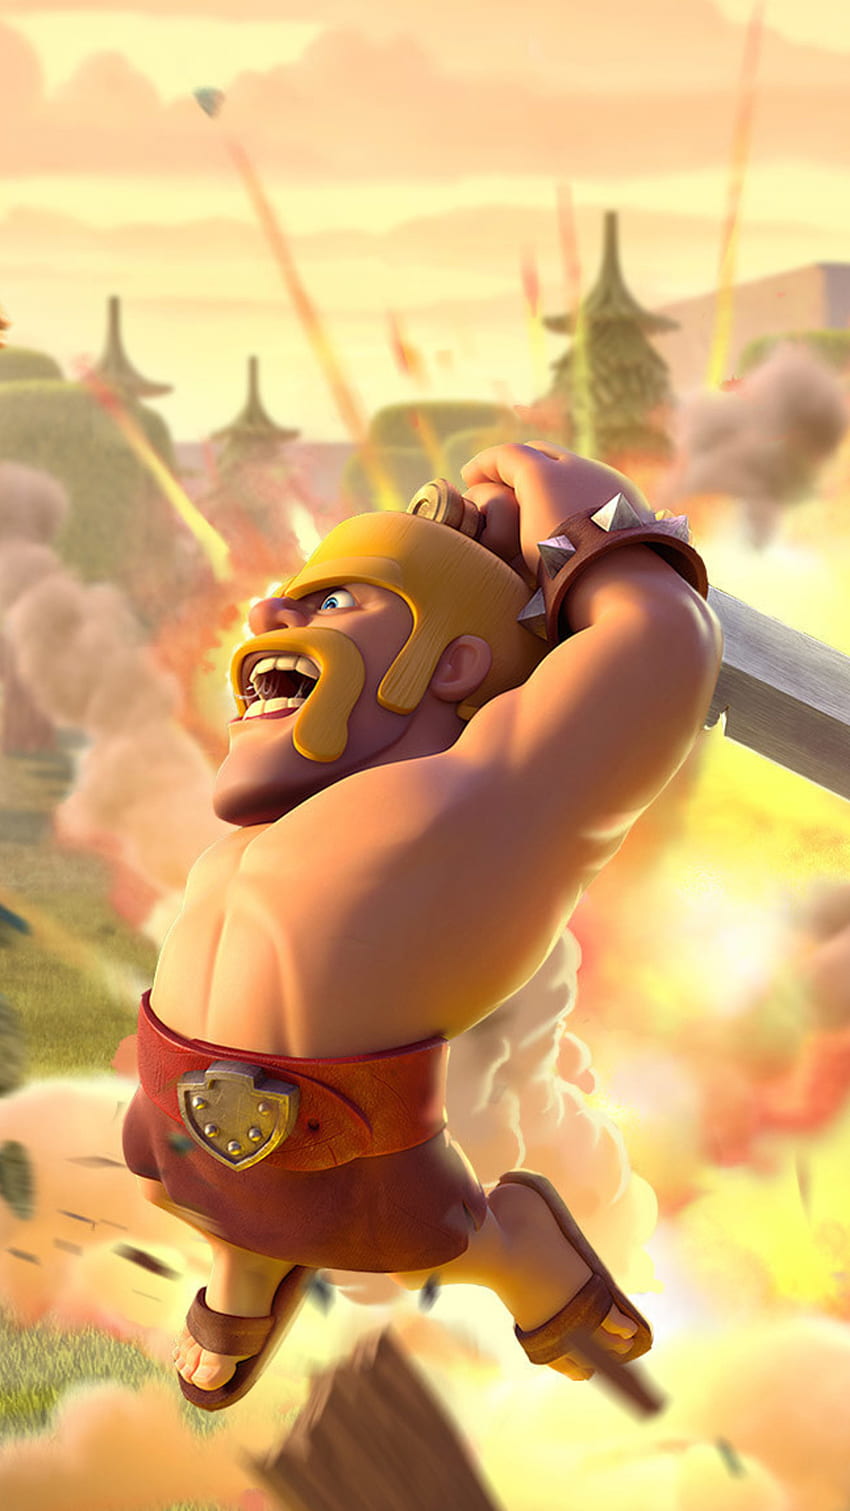 barbarian, clash of clans, supercell, games, for iPhone 6, 7, 8, CoC HD phone wallpaper